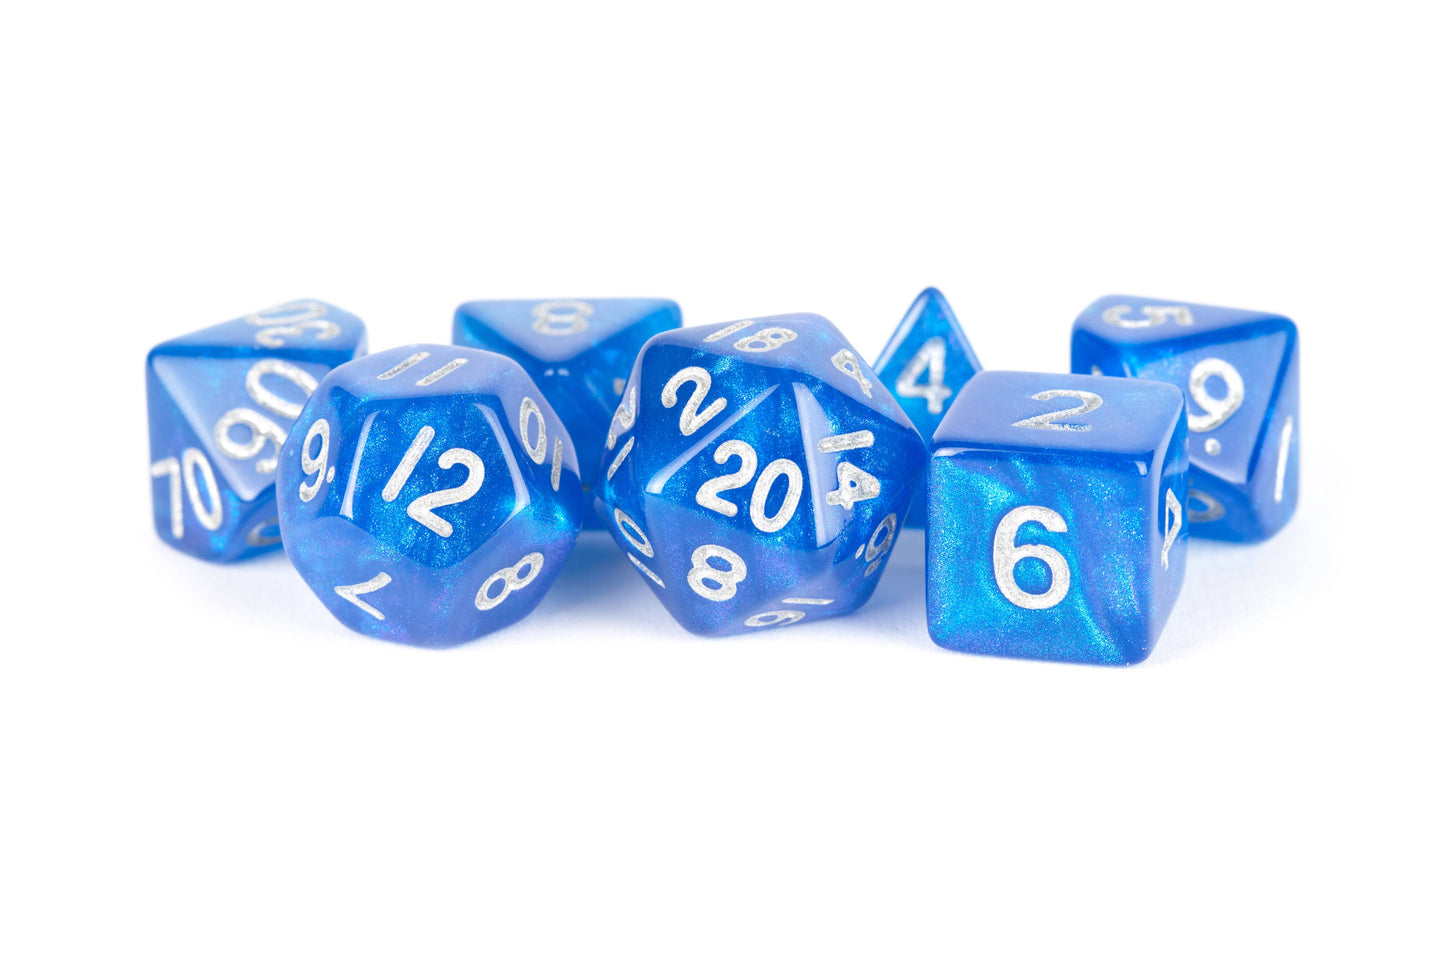 Stardust Acrylic Polyhedral Dice Set Blue w/ Silver Numbers 181